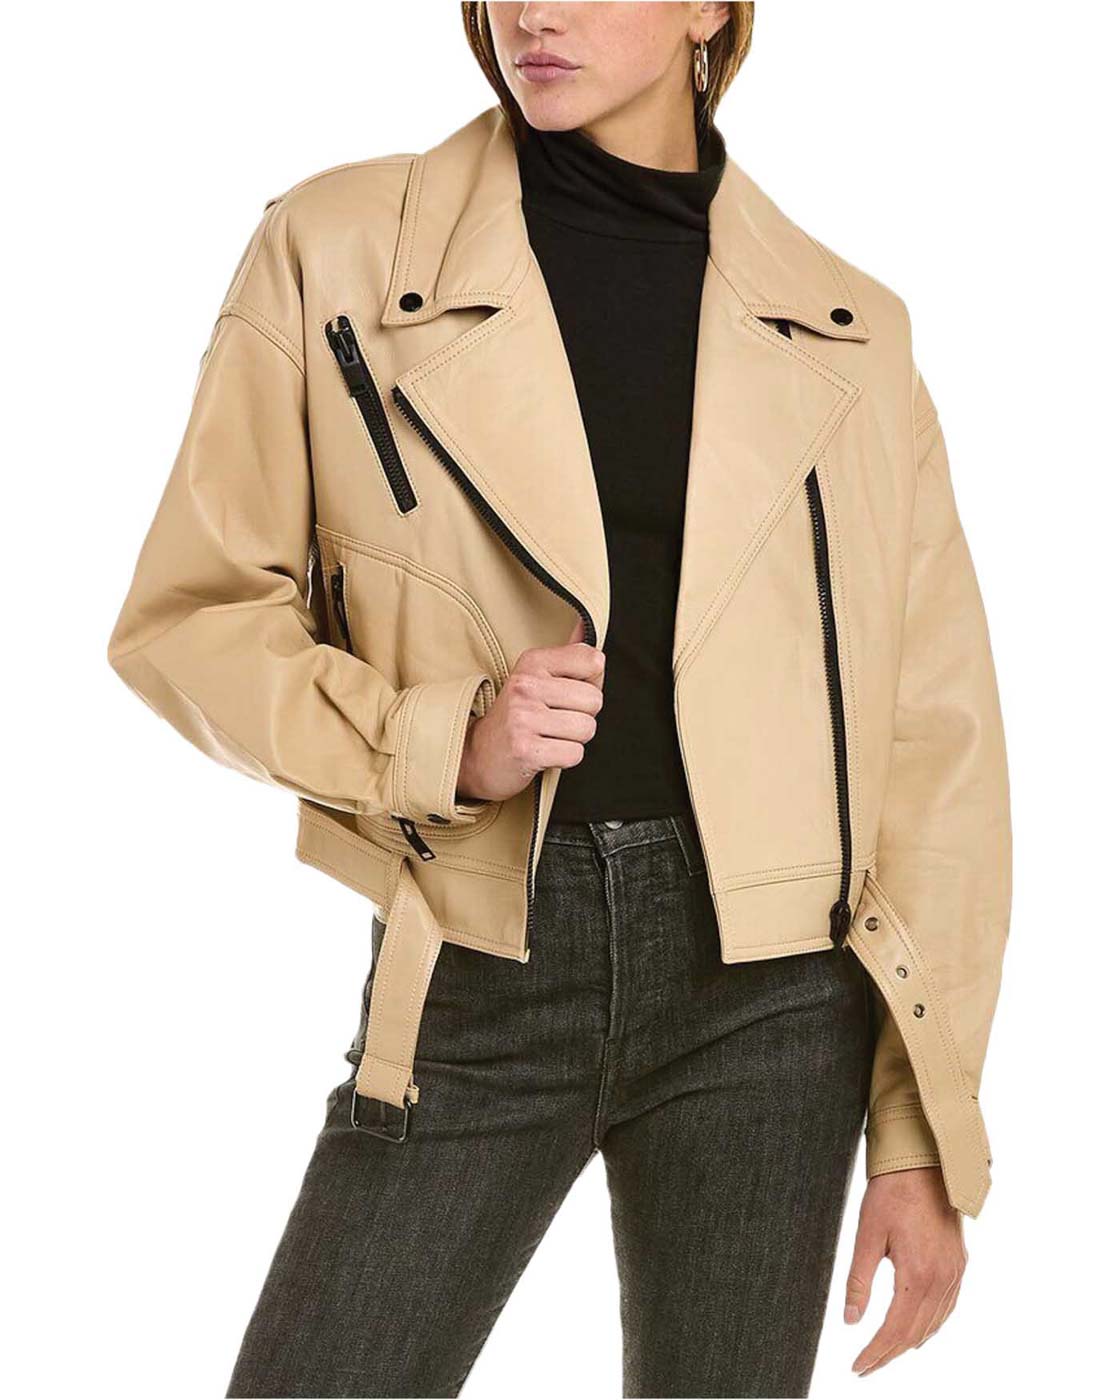 46 Ena Pelly Grace Biker Jacket Regular Price $748 Available At Marcus